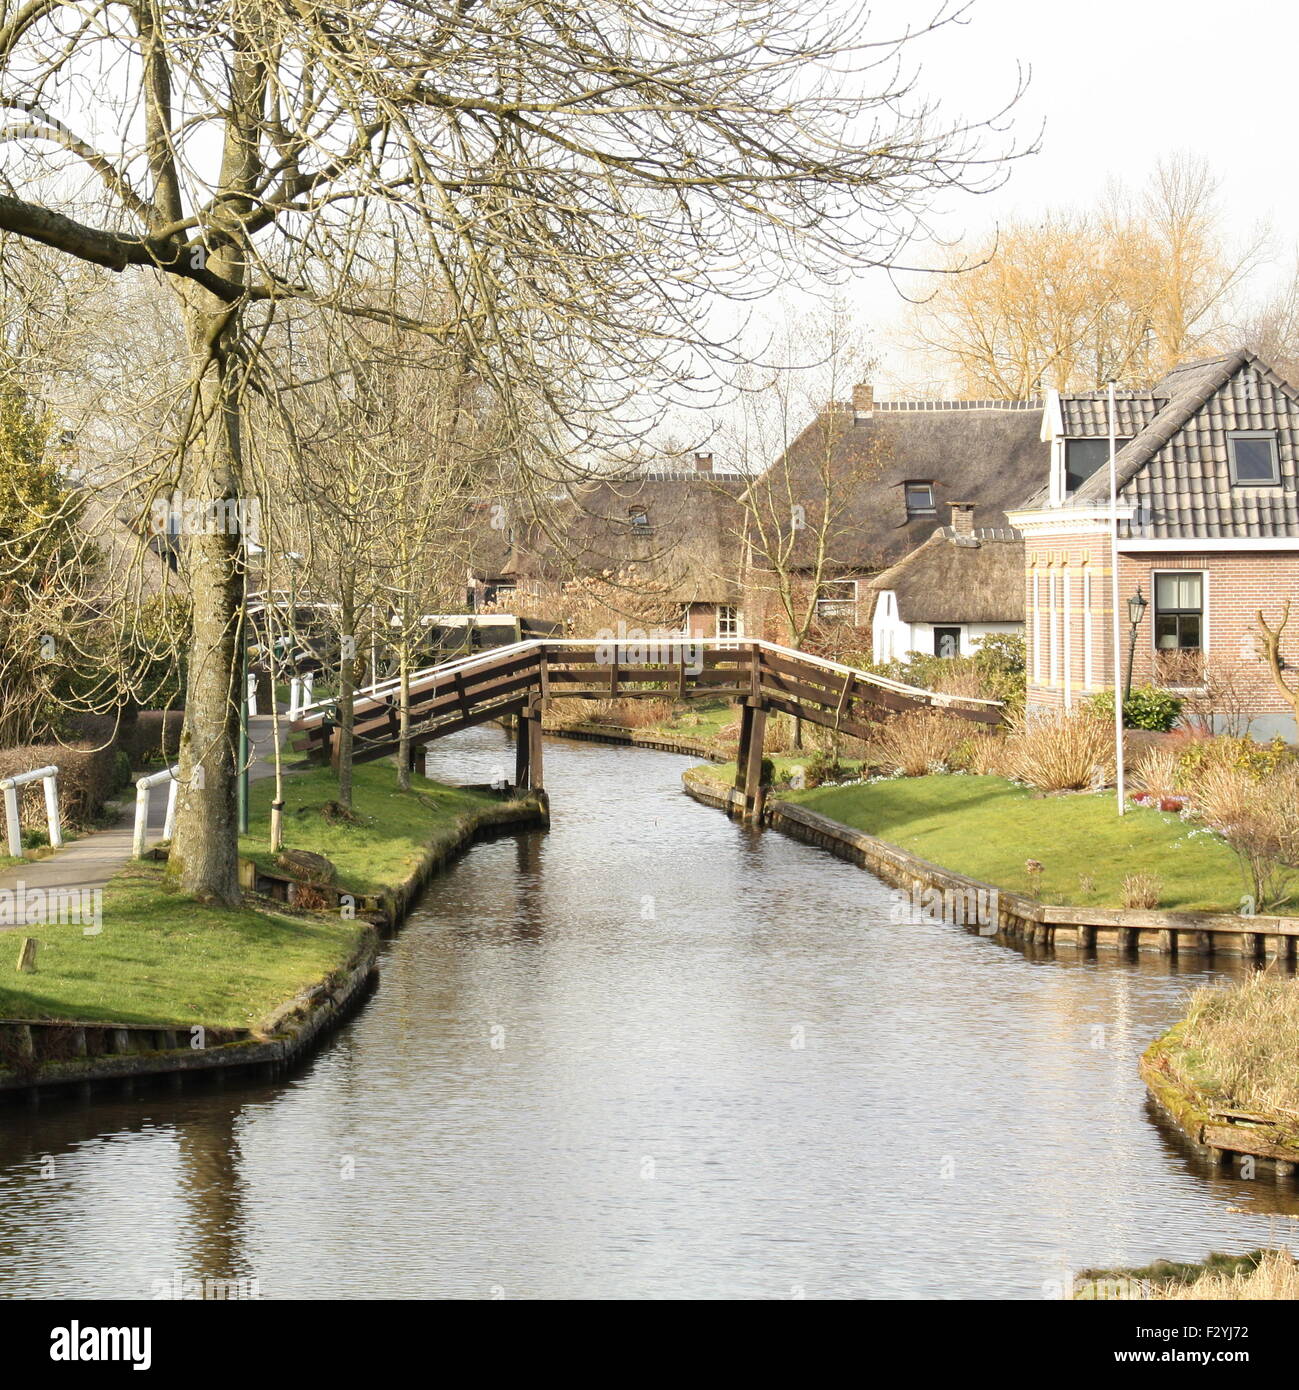 Wooden bridge over a canal in Giethoorn. Netherlands Stock Photo